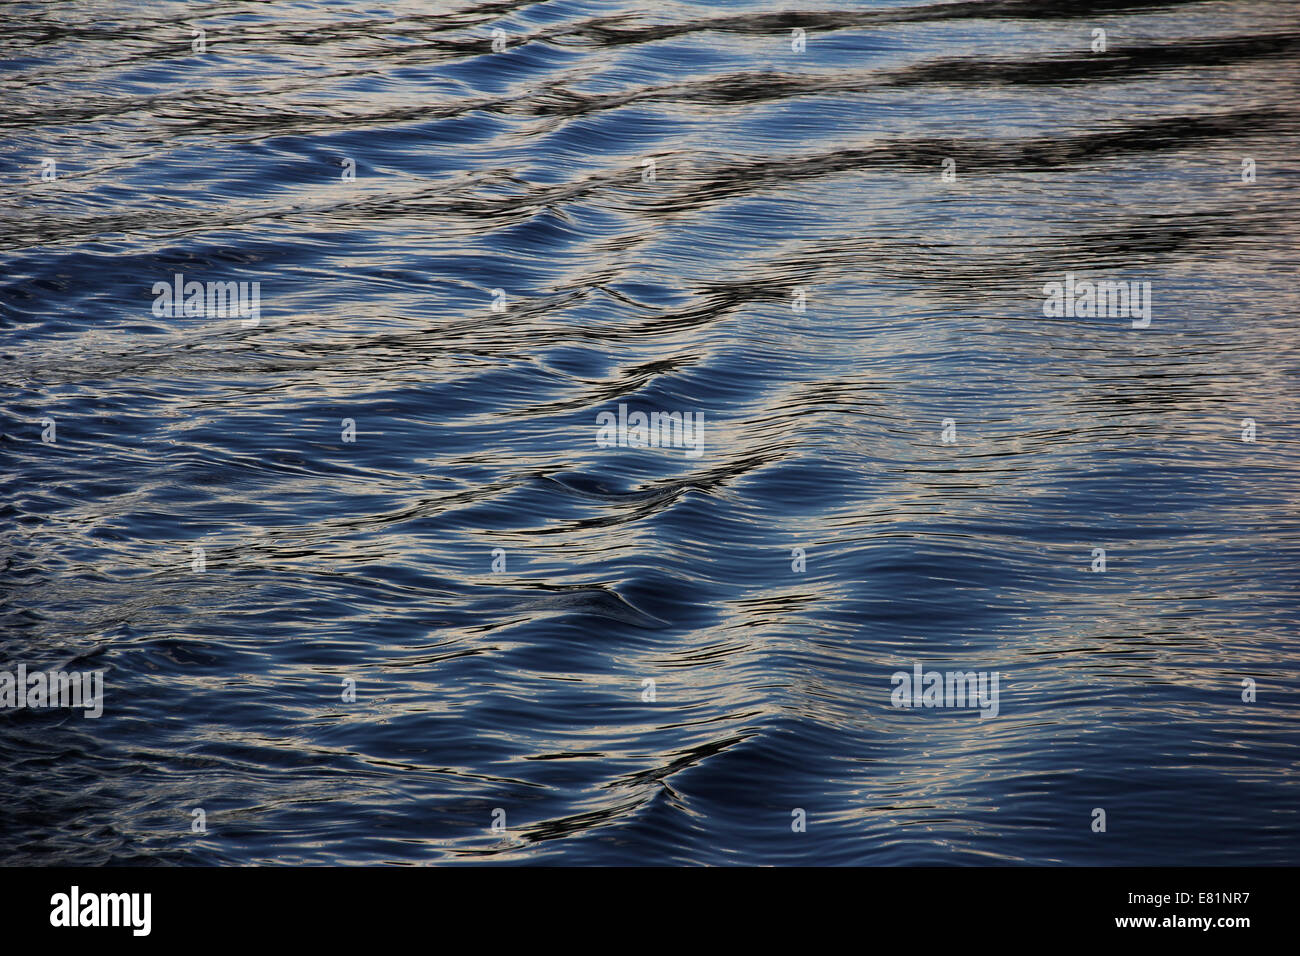 Water waves, Lake Constance, Germany Stock Photo